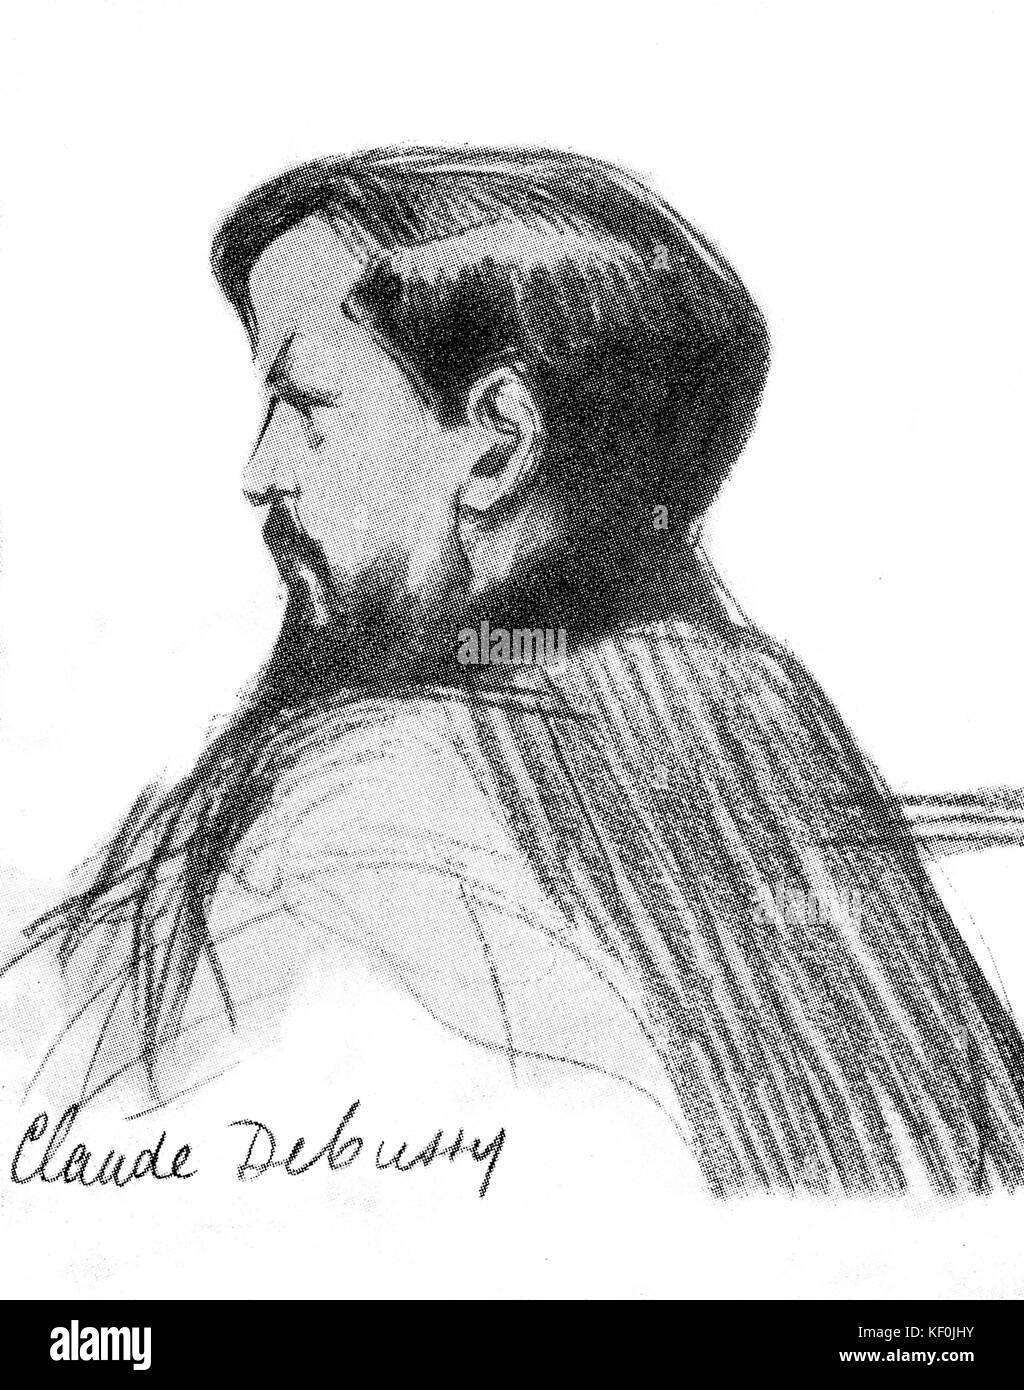 Claude Debussy - line drawing portrait by Henry Detouche, early 20th century.  CD: French composer, 22 August 1862 - 25 March 1918. Stock Photo